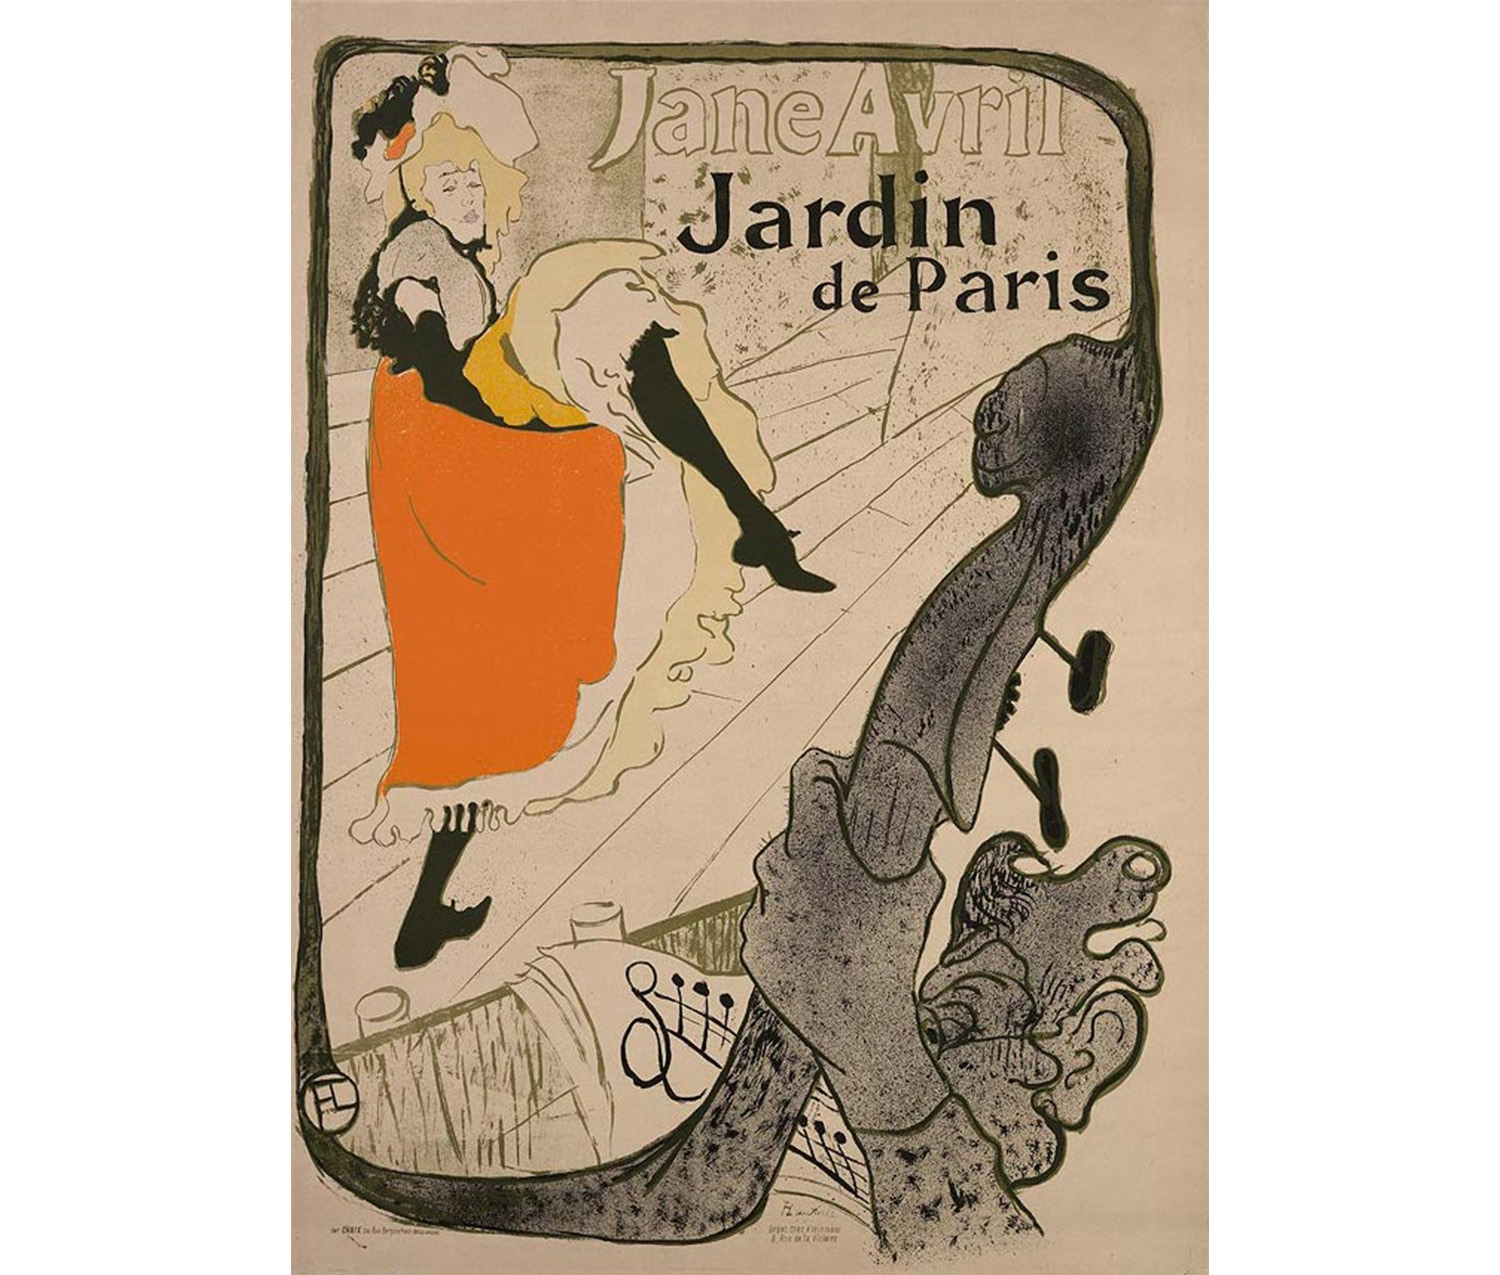 image of a harp surrounding a woman wearing a black and orange dress and holding one leg up to reveal black stockings. in the top right, text reads "Jane Avril / Jardin de Paris"